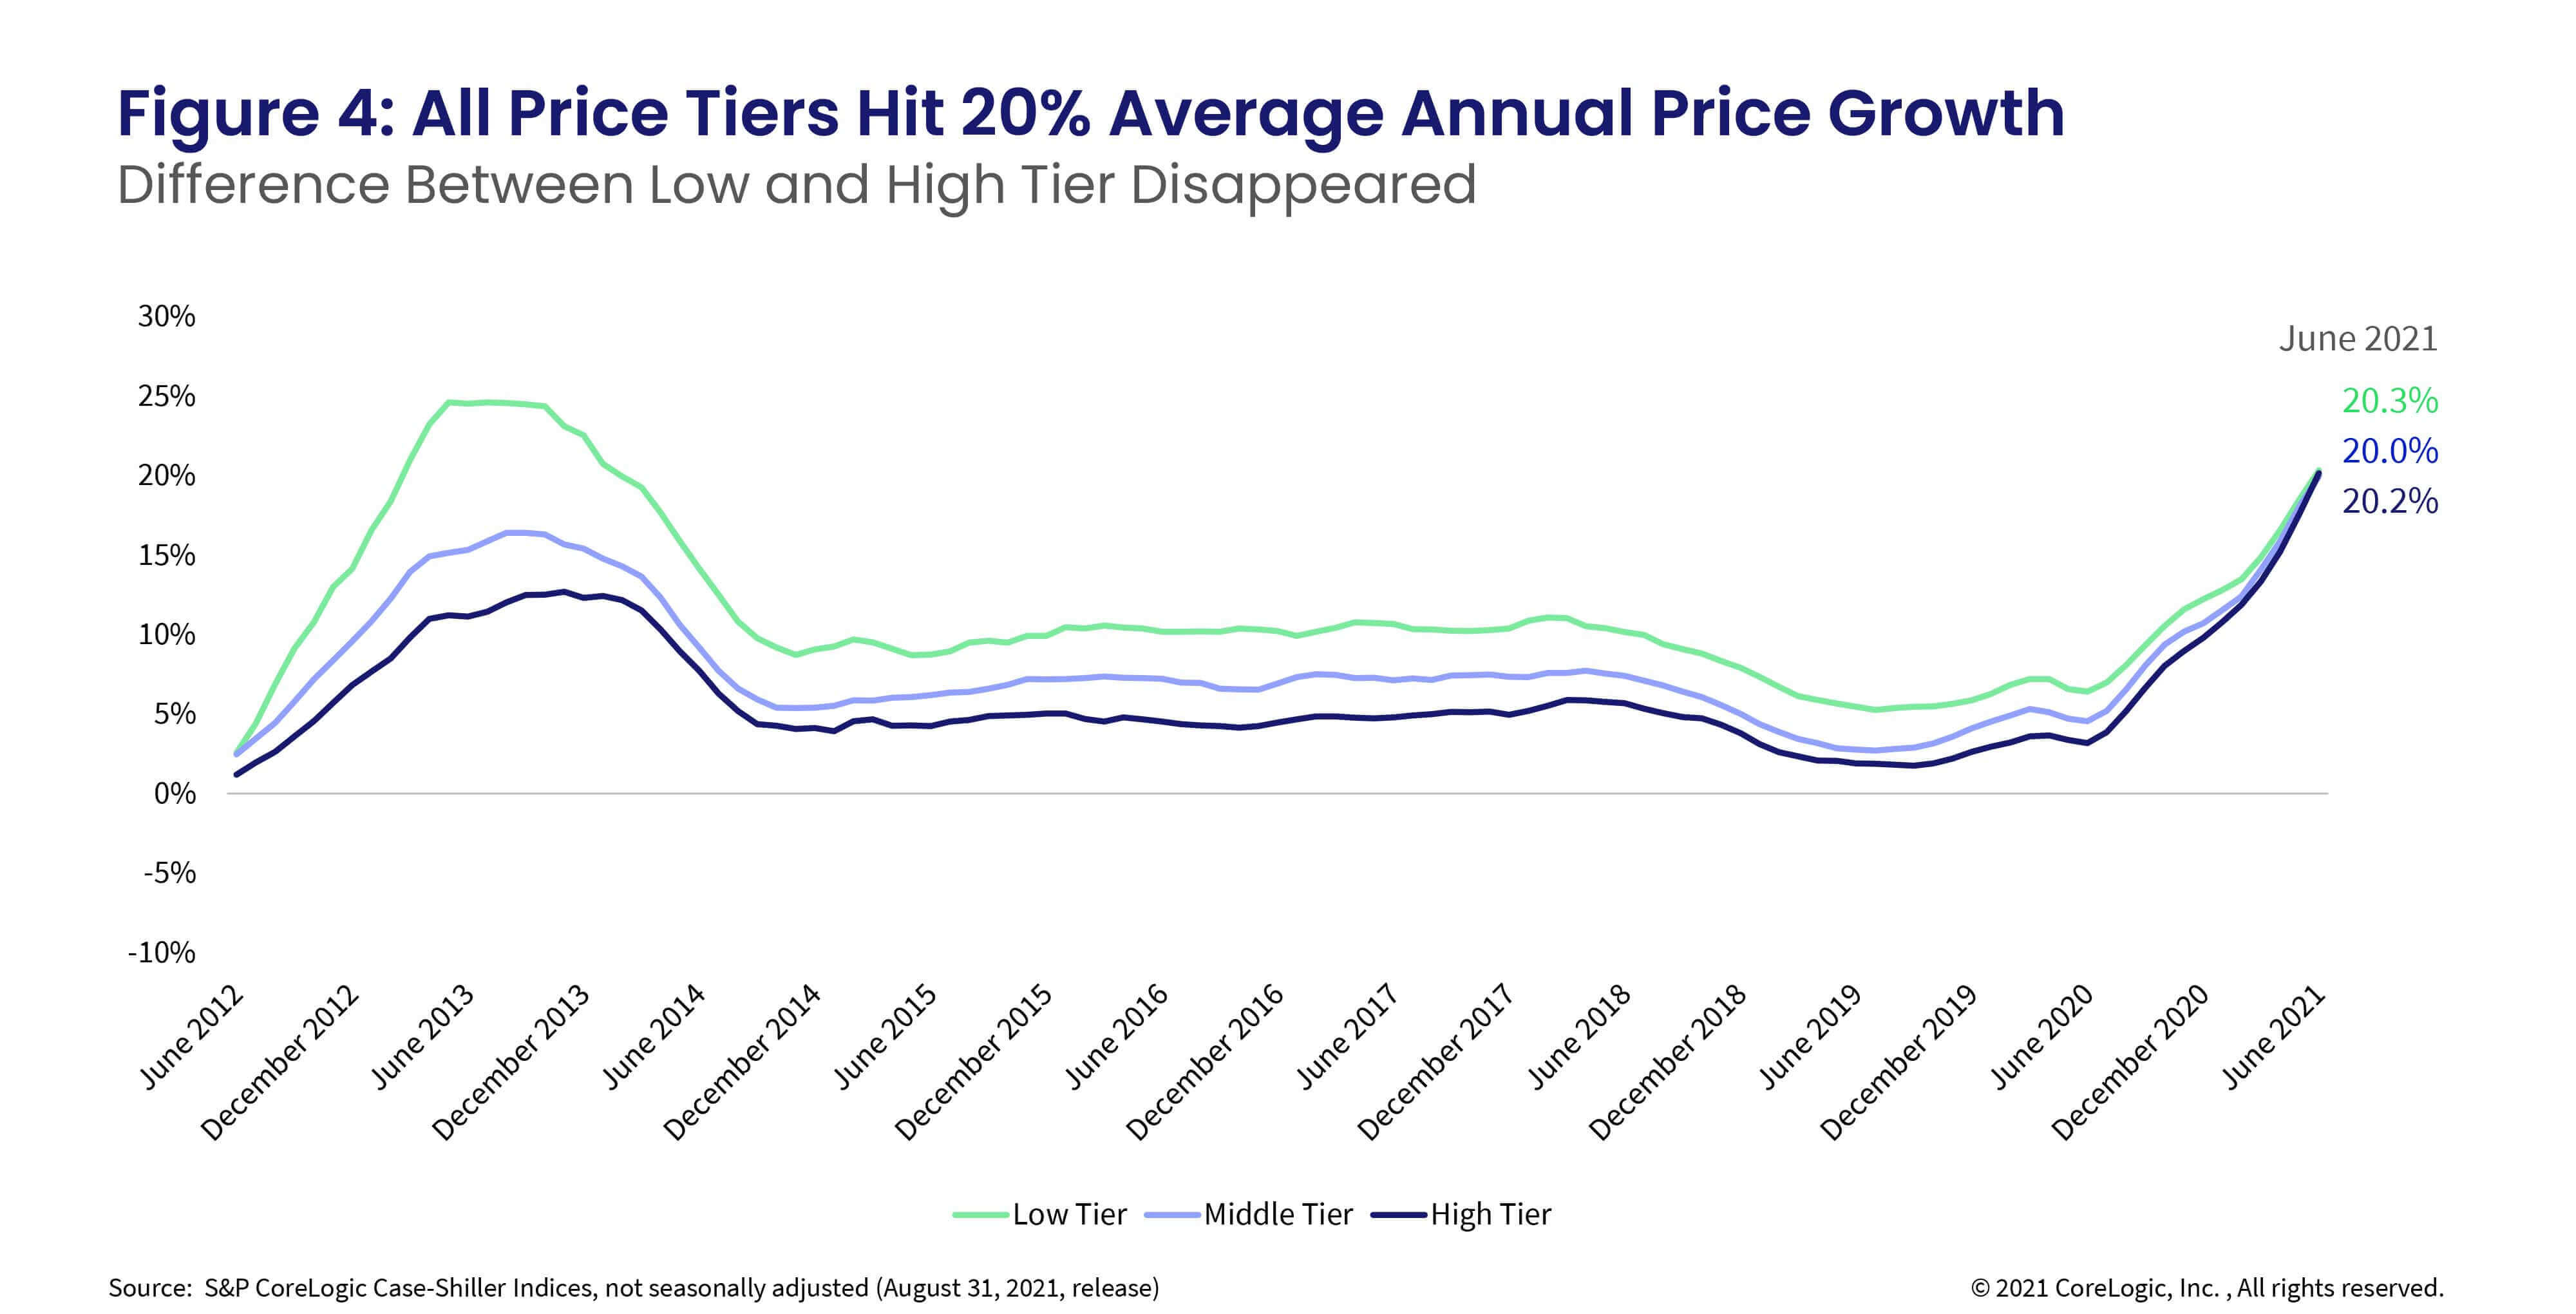 Figure 4: All Price Tiers Hit 20% Average Annual Price Growth